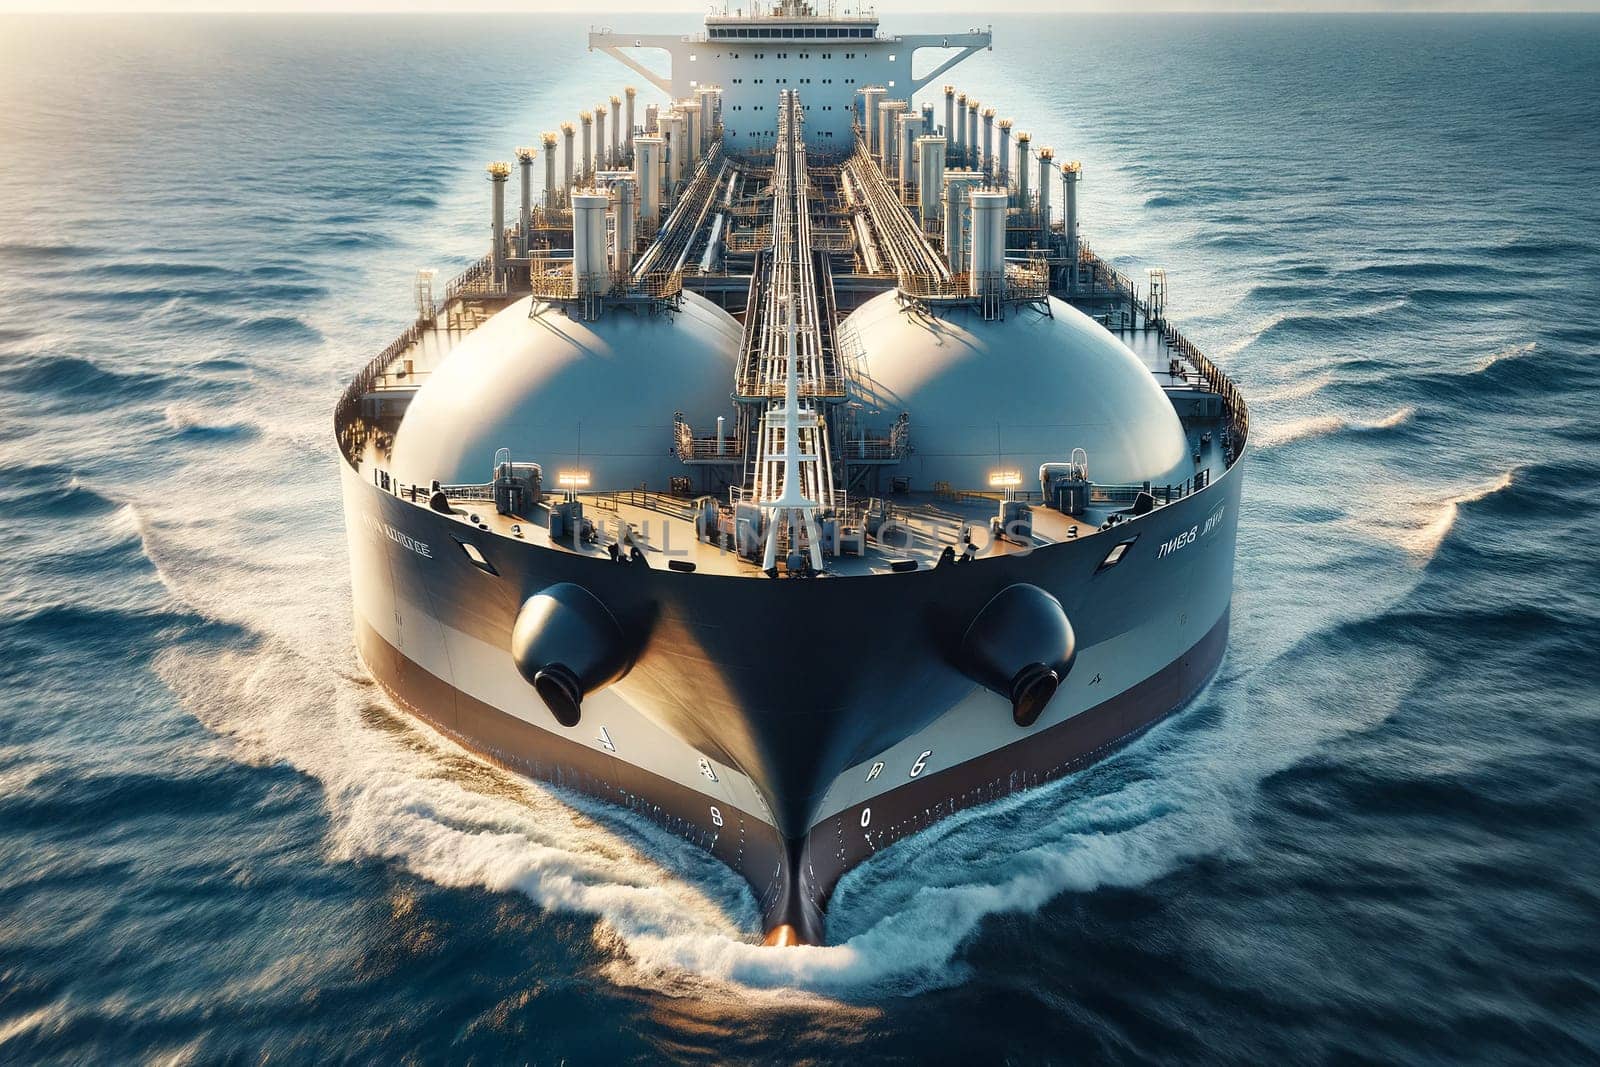 front profile of a liquefied gas tanker close-up and cylindrical tanks in the background.